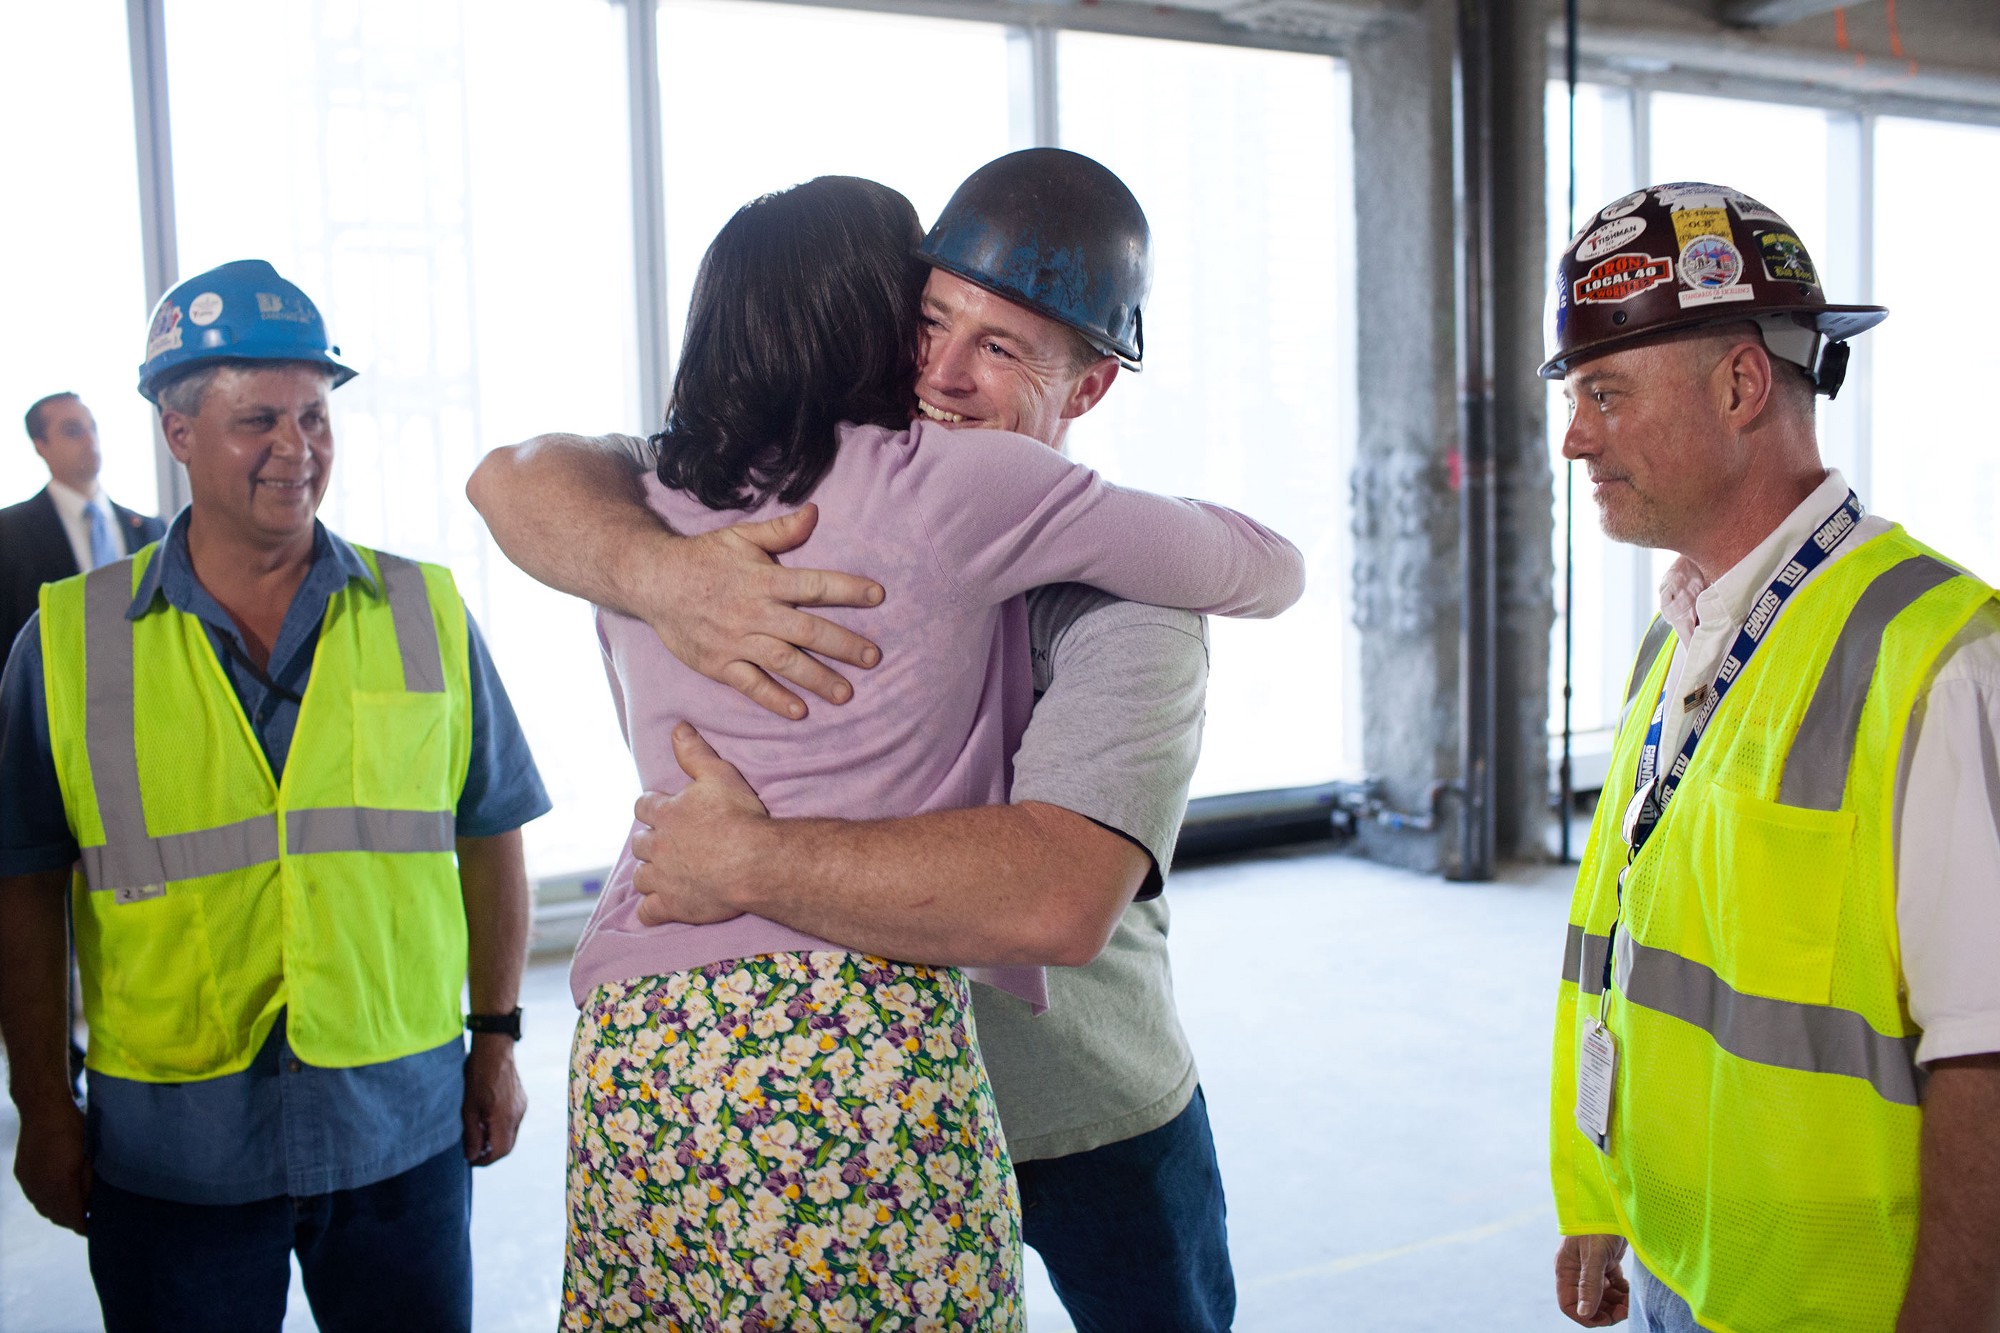 June 14, 2012. Greeting construction workers at the One World Trade Center site in New York City. (Official White House Photo by Pete Souza)